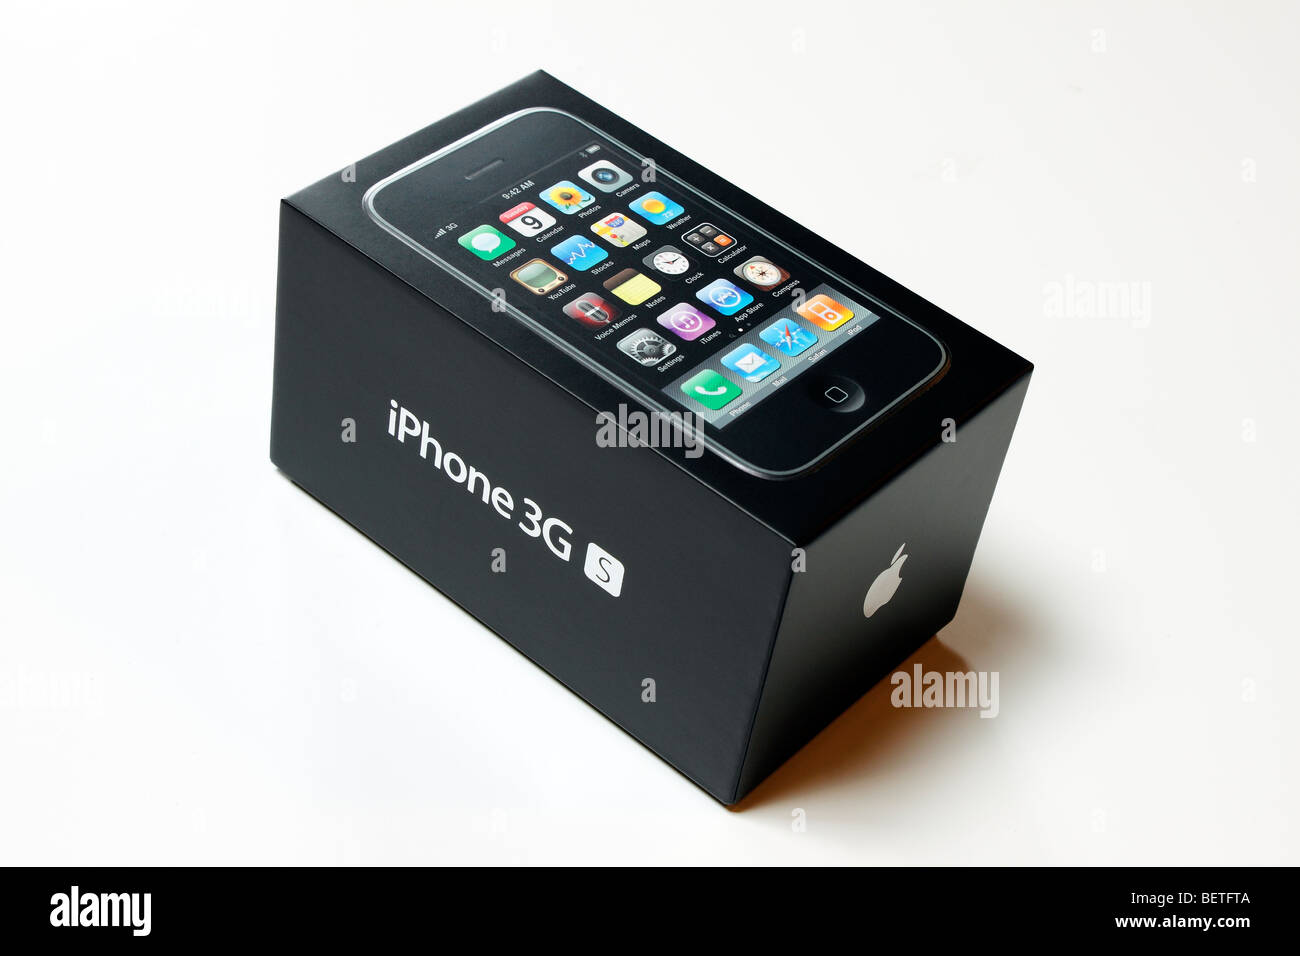 The box of the new iPhone 3G S Stock Photo - Alamy